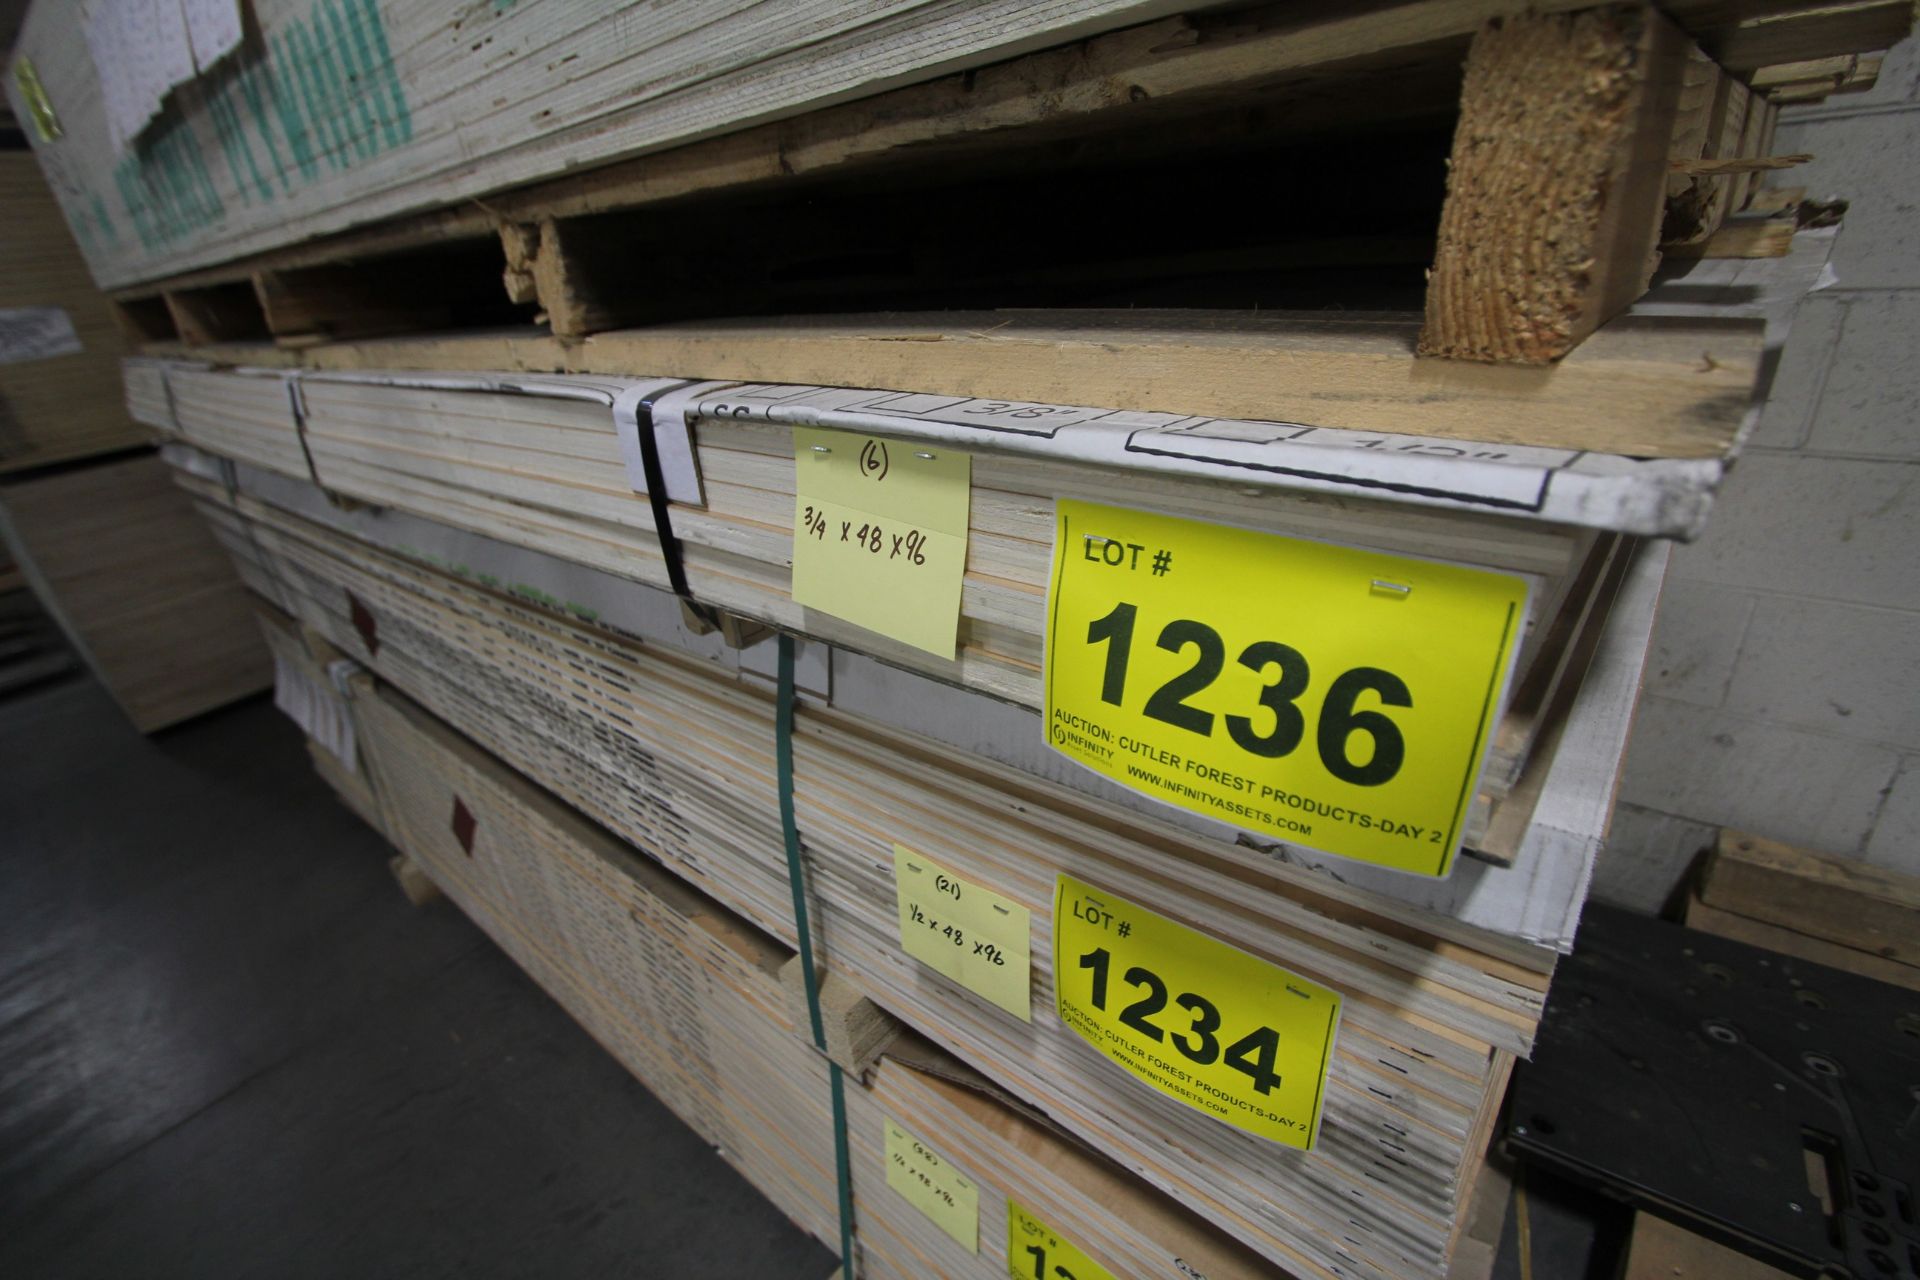 SHEETS OF 3/4" X 48" X 96" PLYWOOD